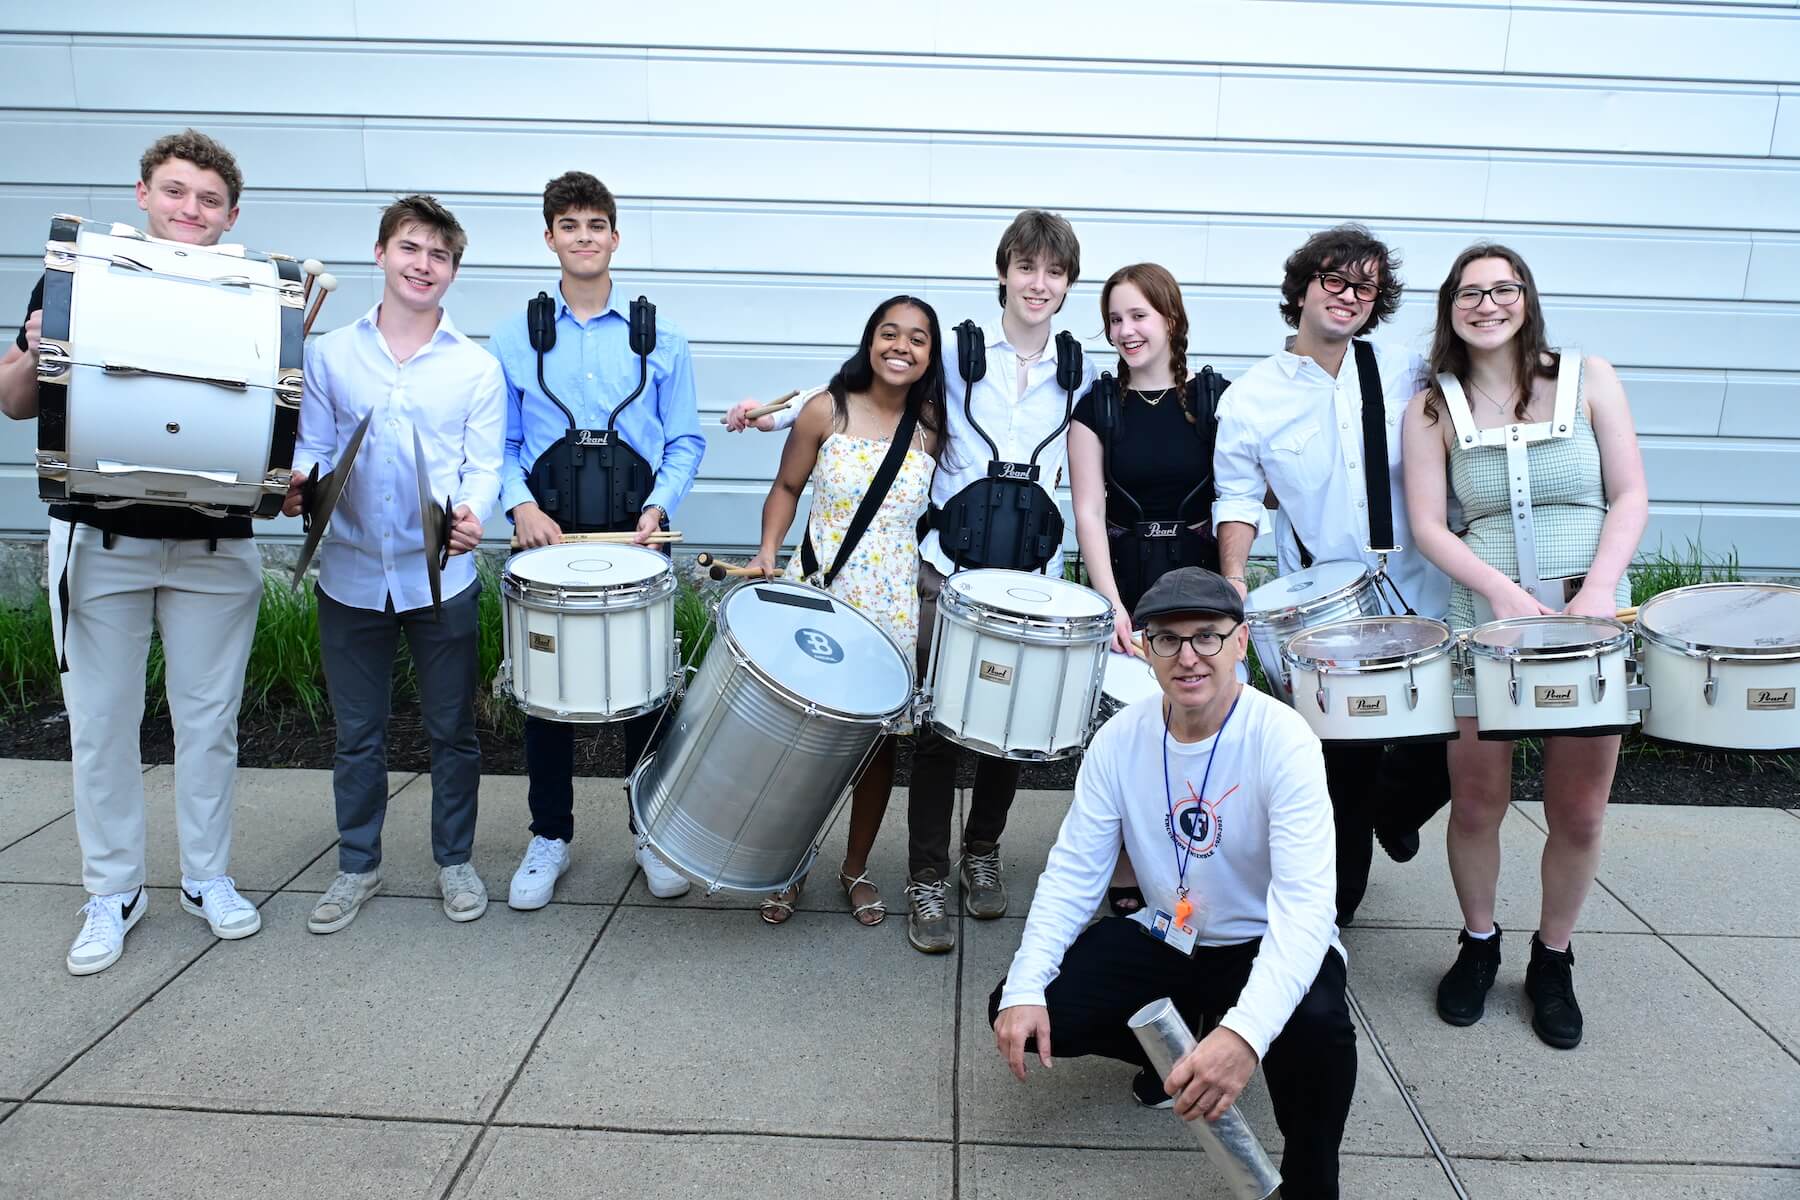 Ethical Culture Fieldston School Upper School students smiling while holding their percussion instruments